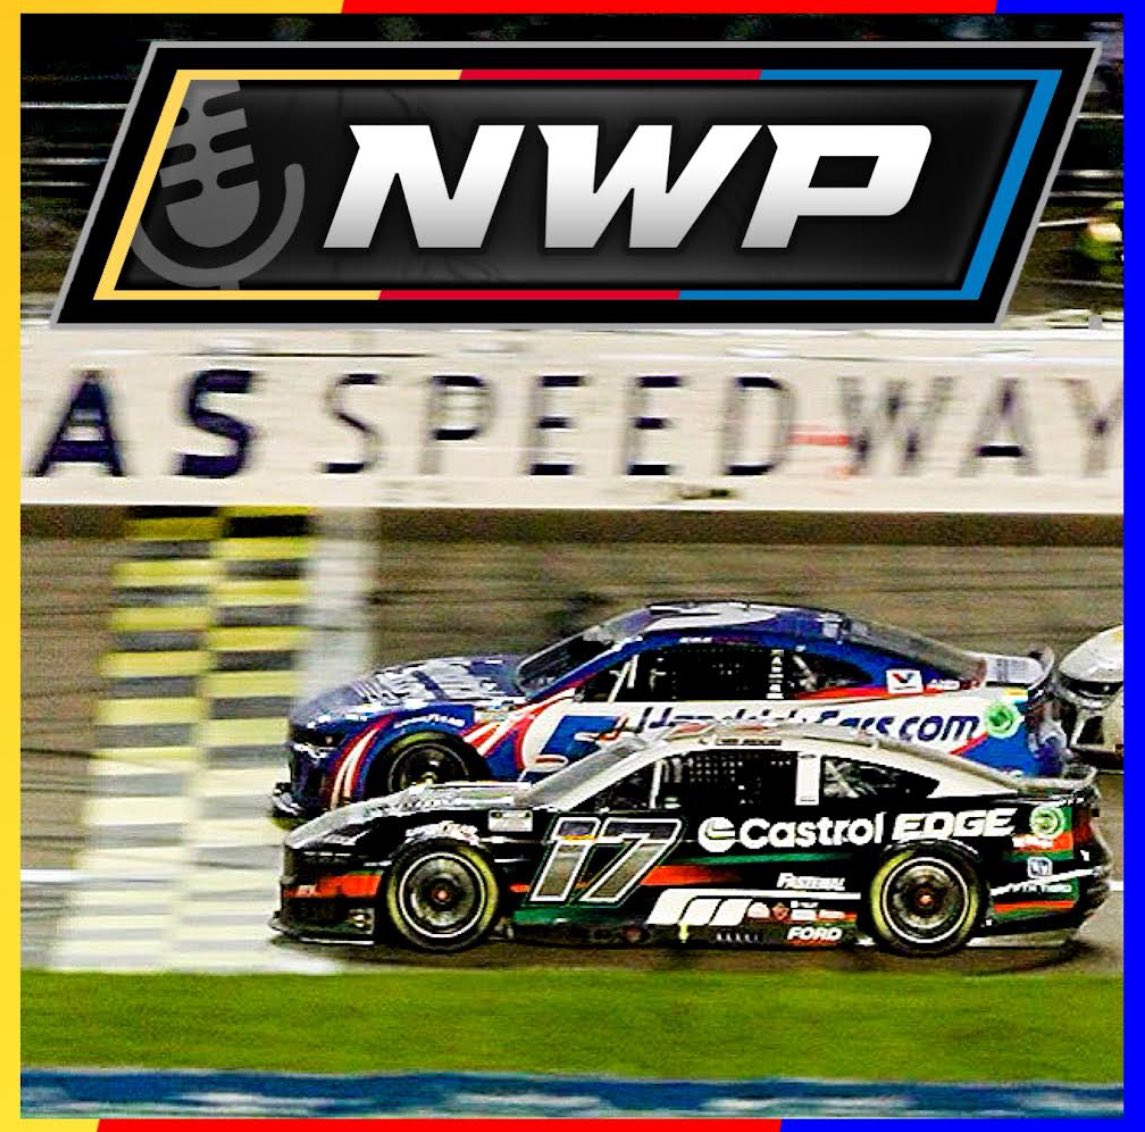 Didn’t catch NWP live last night? No problem, you can listen to it here! 📺: youtube.com/playlist?list=… 🔊: groovymotorsports.com/#podcasts 🍎: podcasts.apple.com/us/podcast/nas… 🎧: open.spotify.com/show/731WUrAE9… ▶️: podcasts.google.com/feed/aHR0cHM6L… #NASCAR